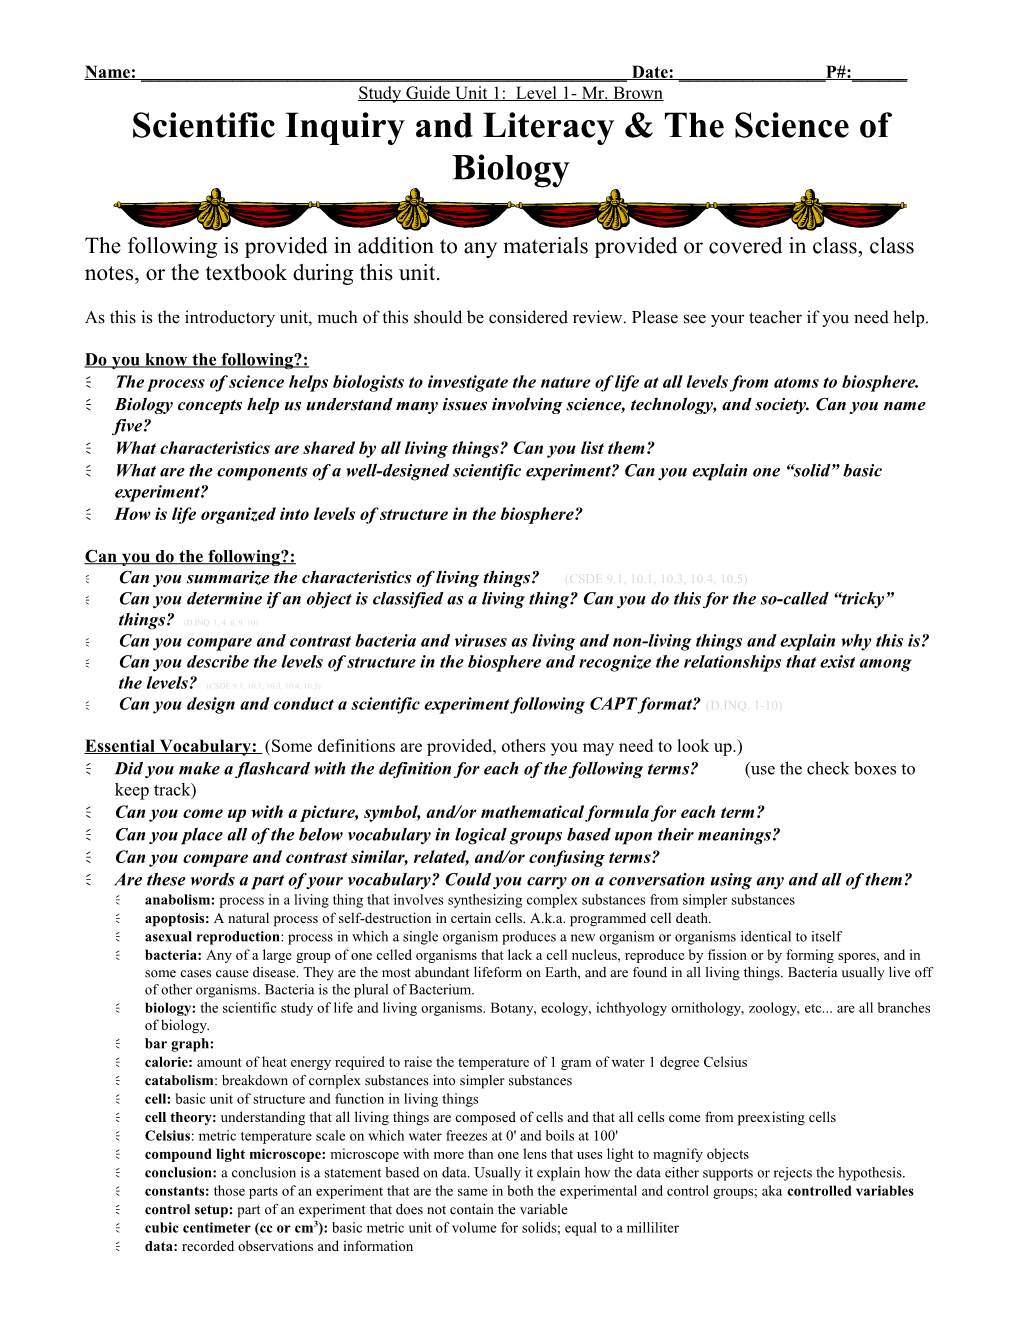 Scientific Inquiry and Literacy & the Science of Biology